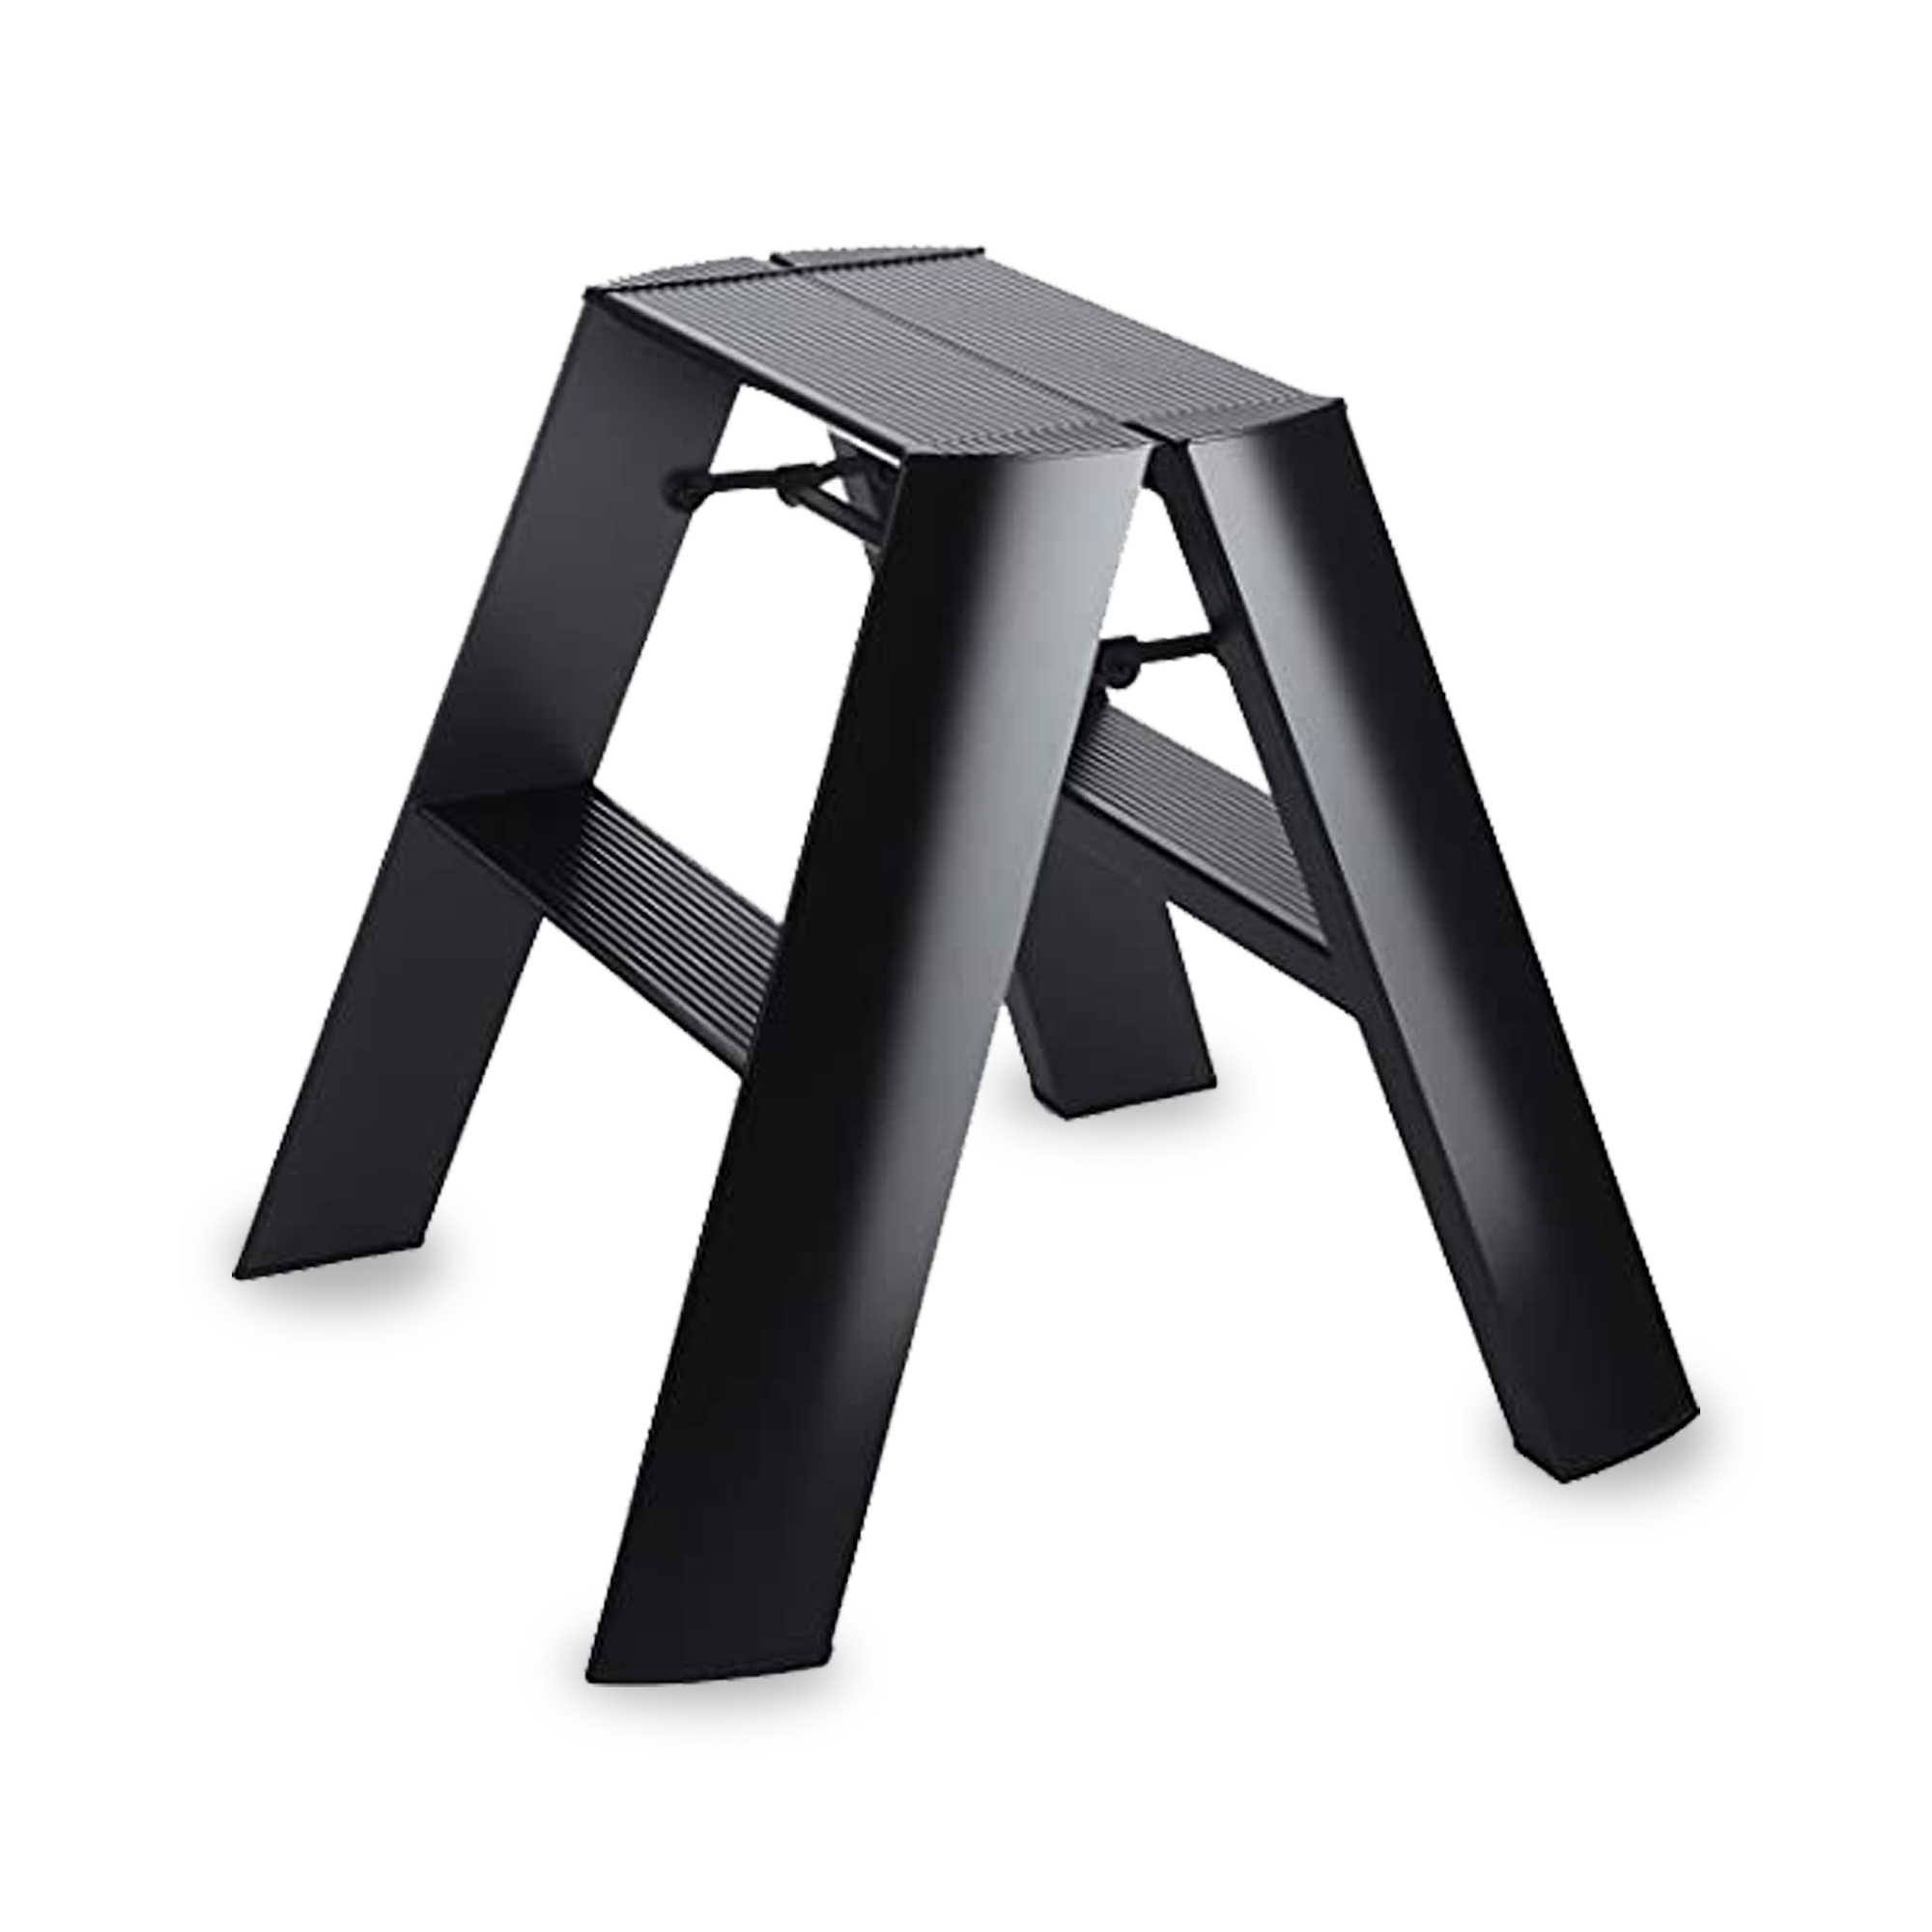 The 2 Step Ladder in black is incredibly slim when folded but features wide legs to reinforce stability and safety.